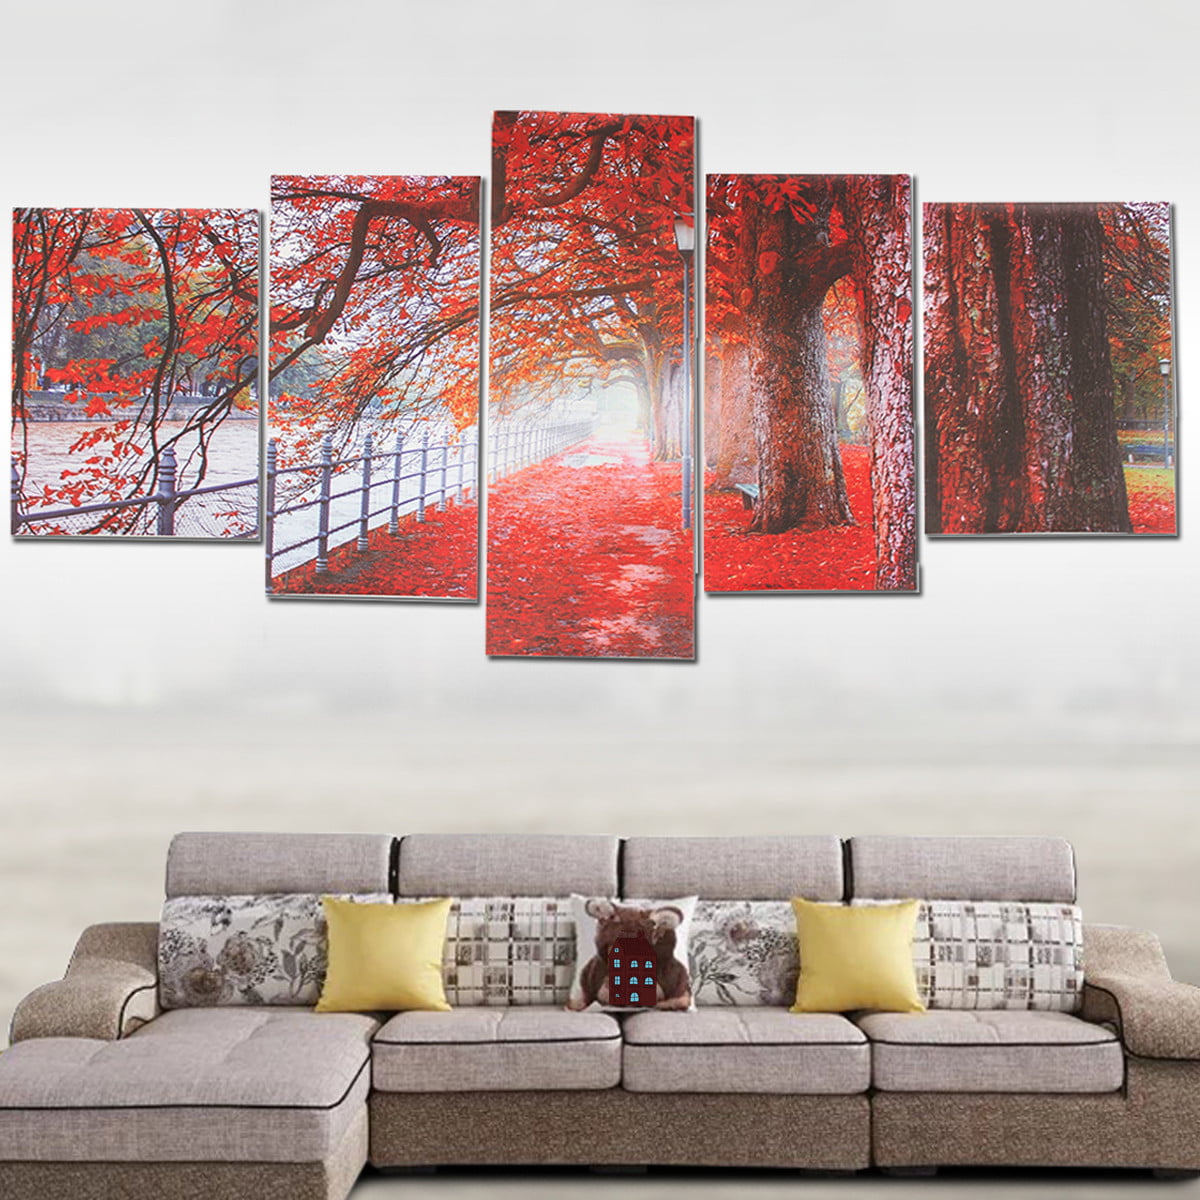 5Pcs/set Unframed Oil Painting Picture Abstract Art Canvas Print Home Wall Decor 